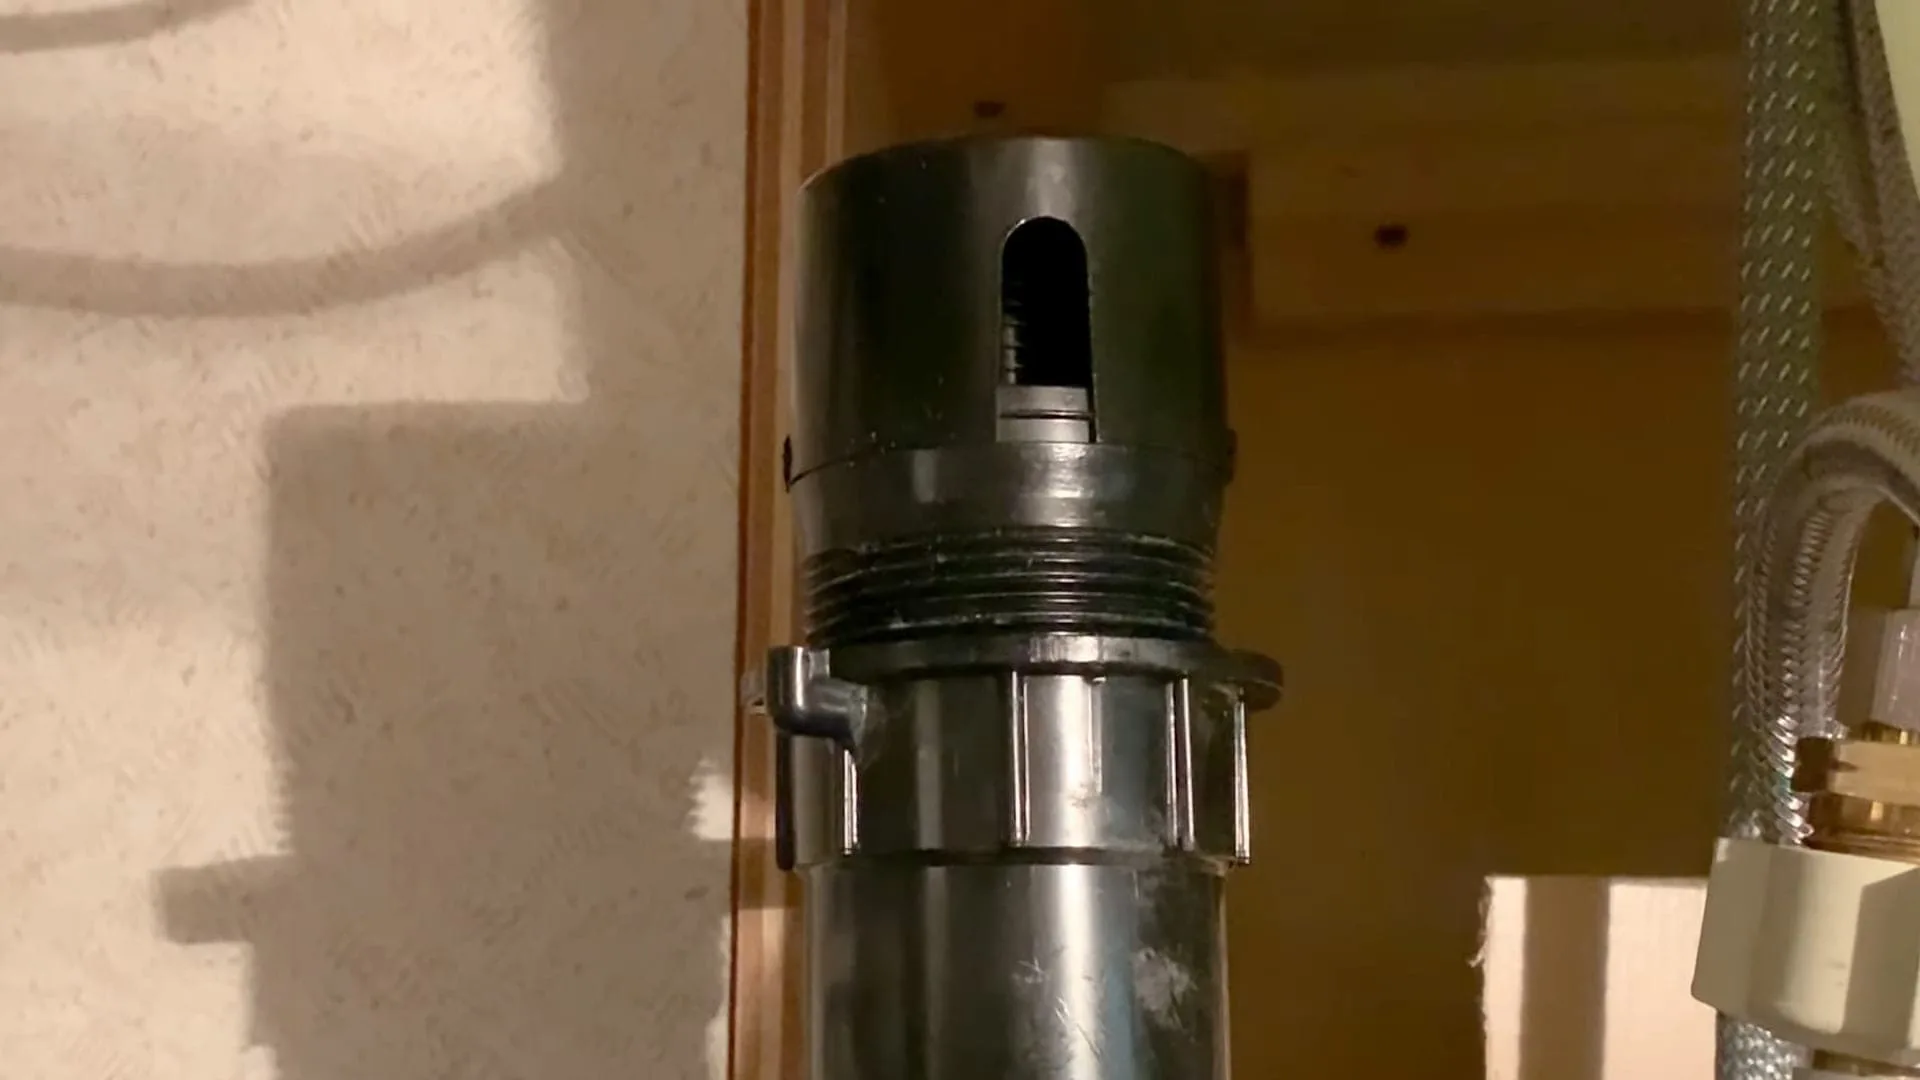 One of air admittance valves under the sink